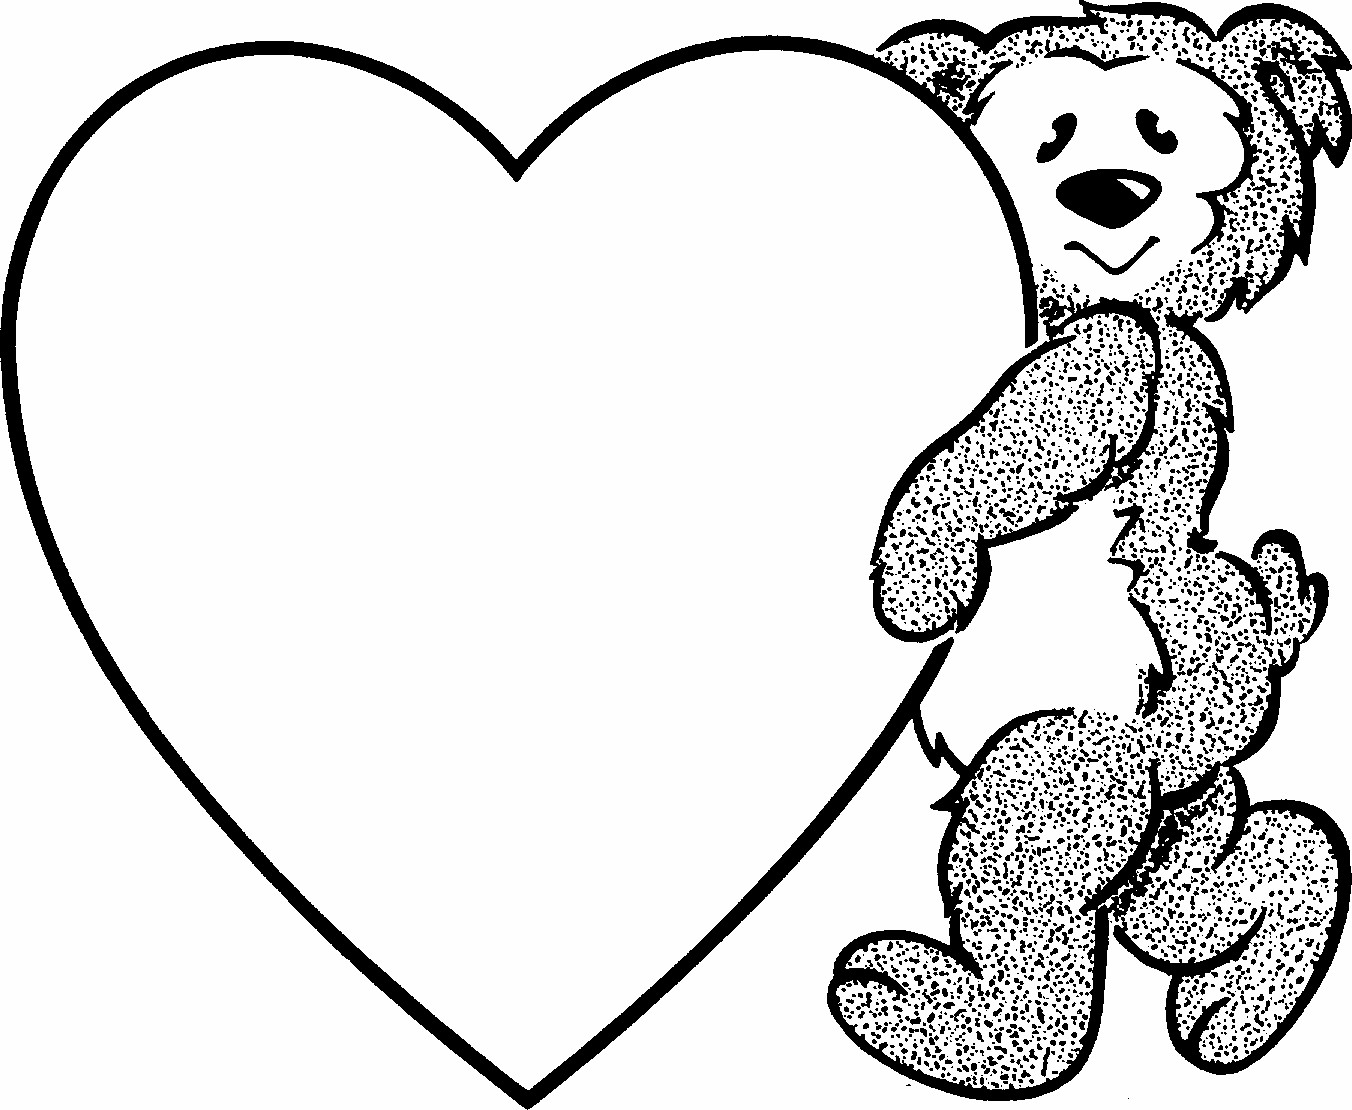 Printable Heart Coloring Pages
 Coloring Pages Hearts Free Printable Coloring Pages for